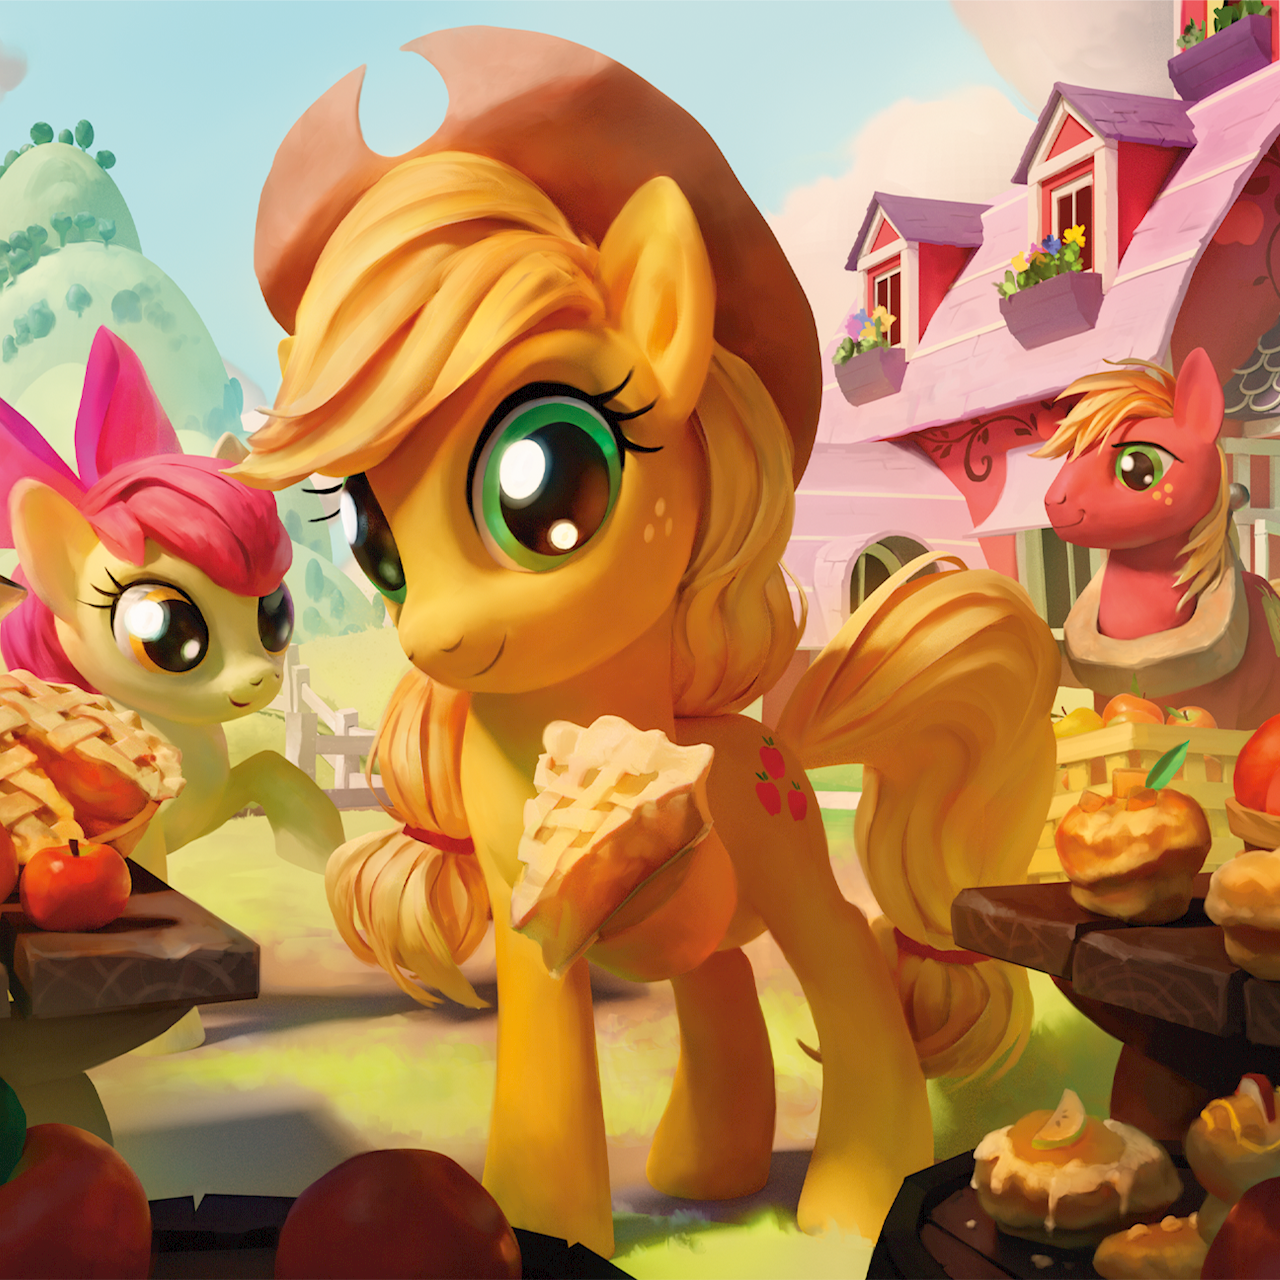 The magical world of MY LITTLE PONY gallops onto consoles and PC